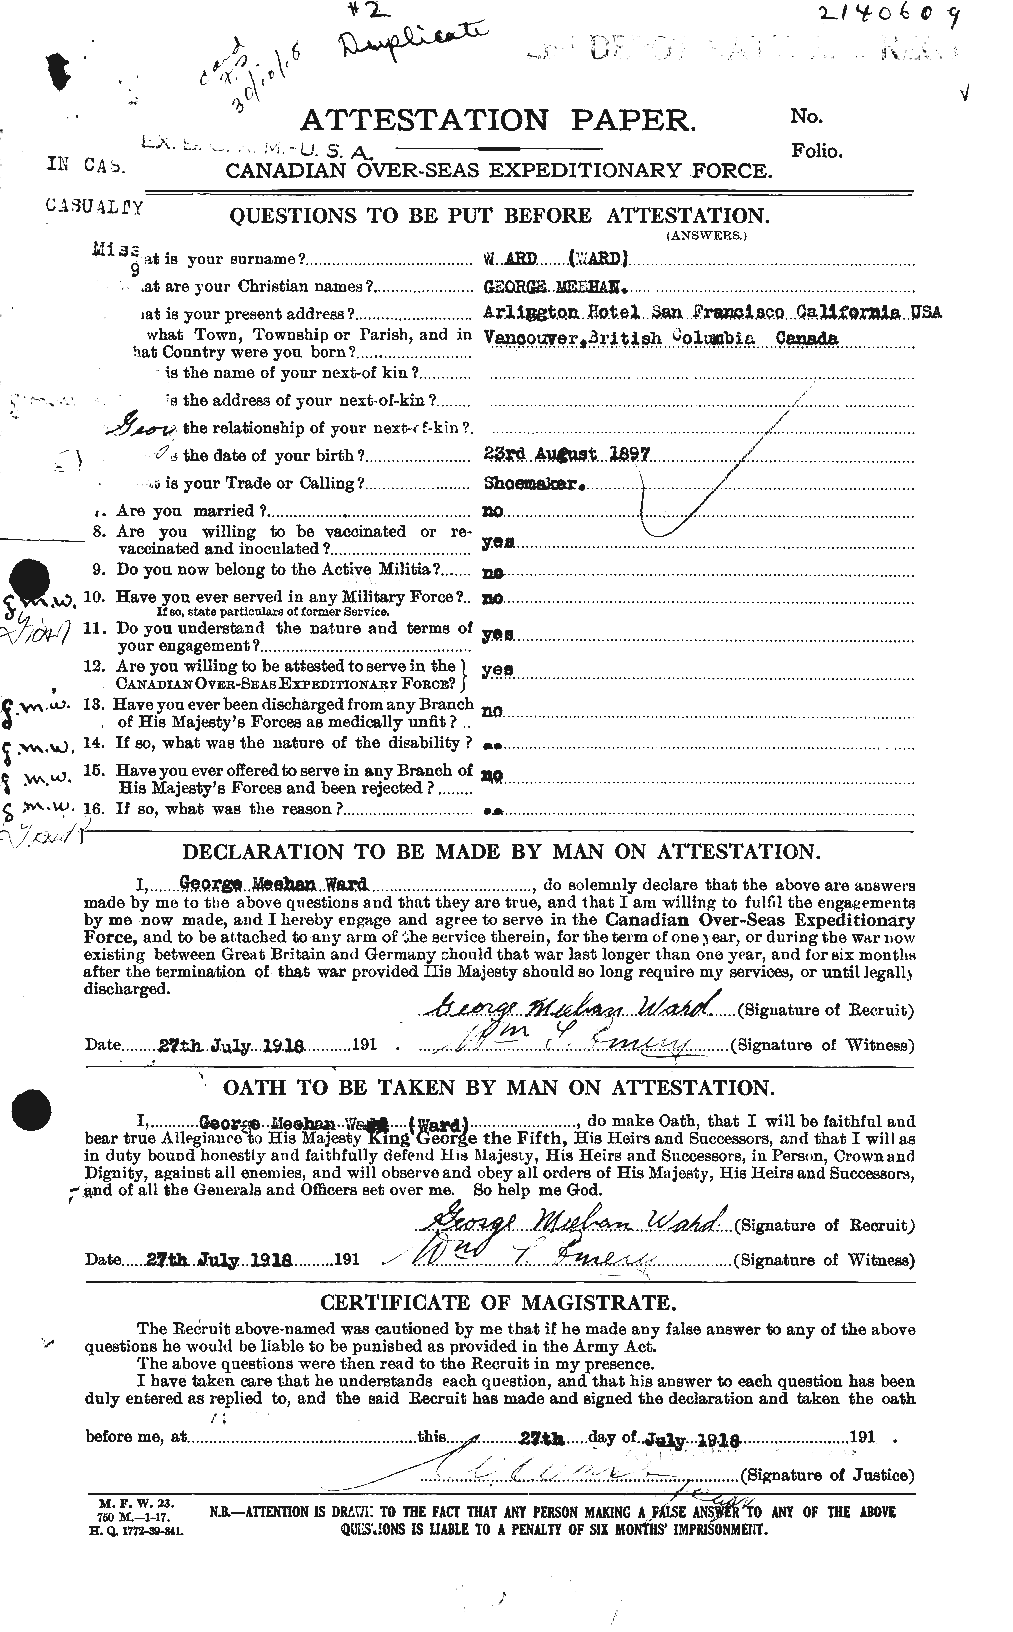 Personnel Records of the First World War - CEF 657779a